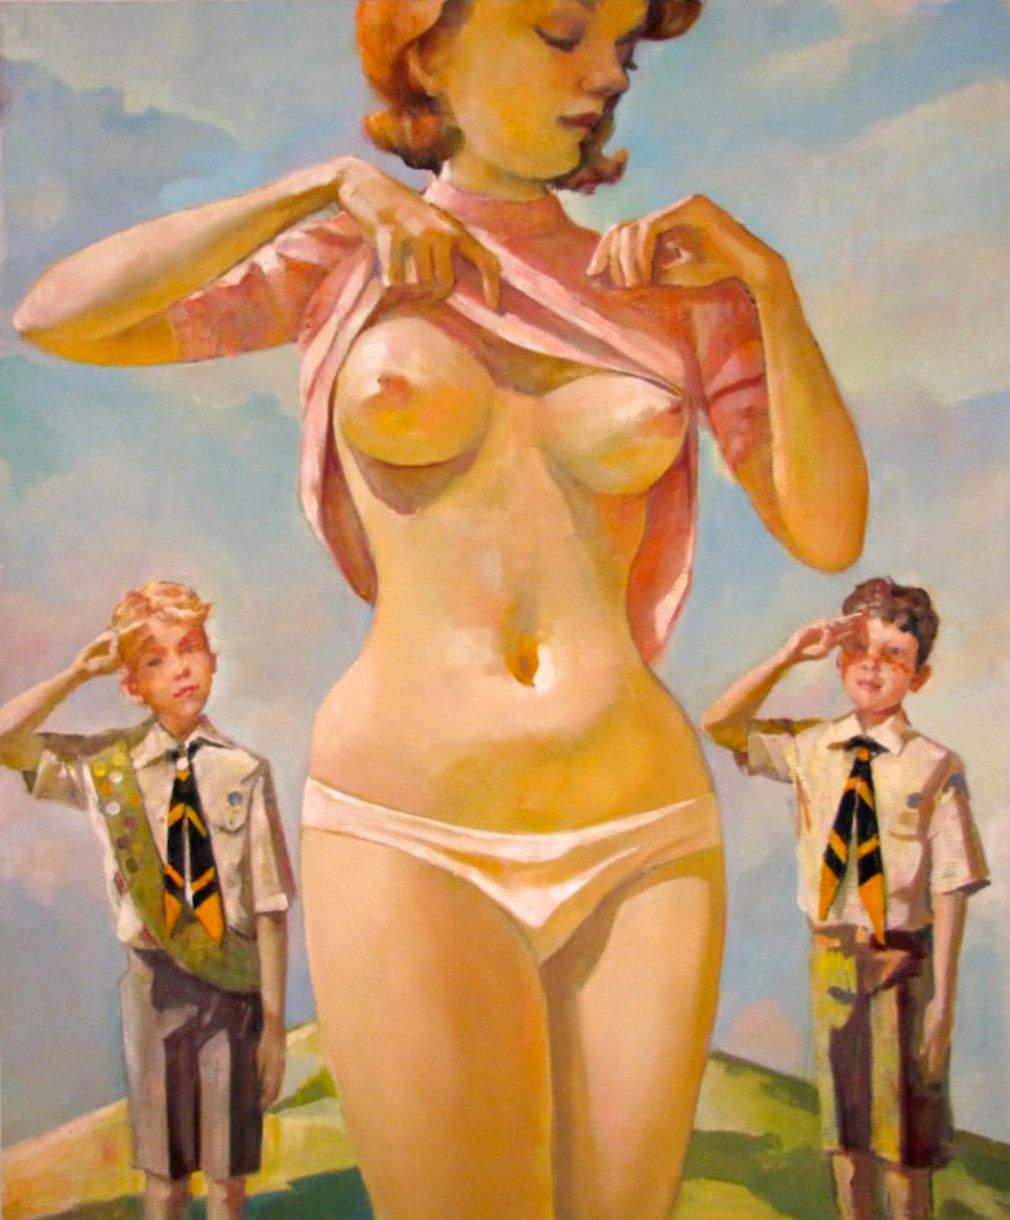 Mike Cockrill, "Boy Scout Salute"